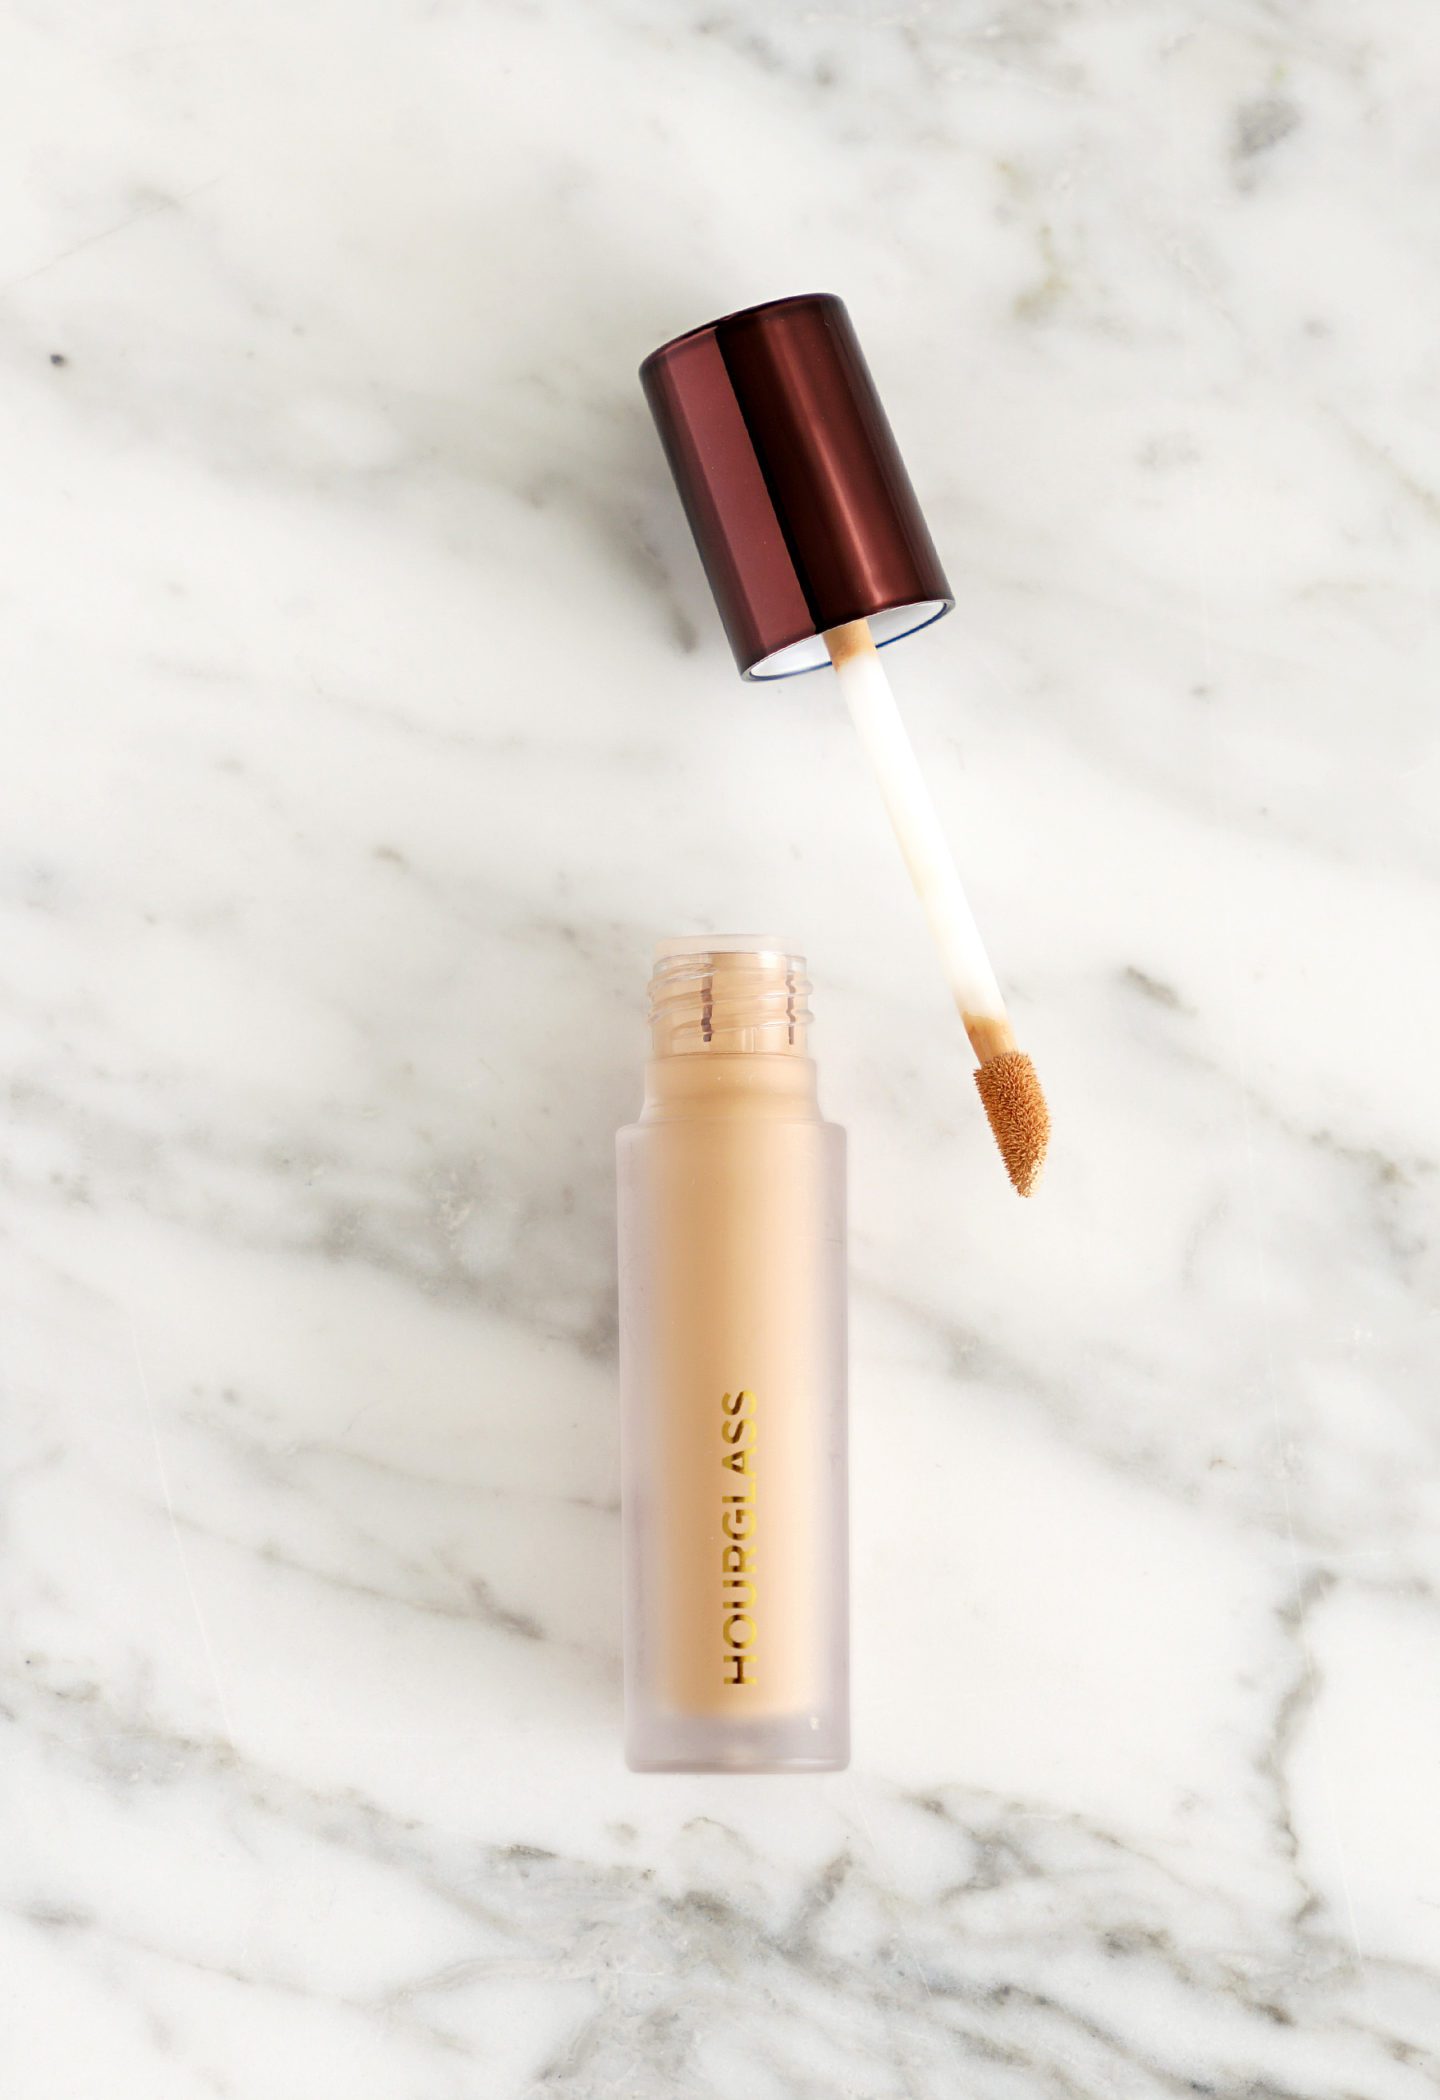 Hourglass Veil Retouching Fluid in Natural review